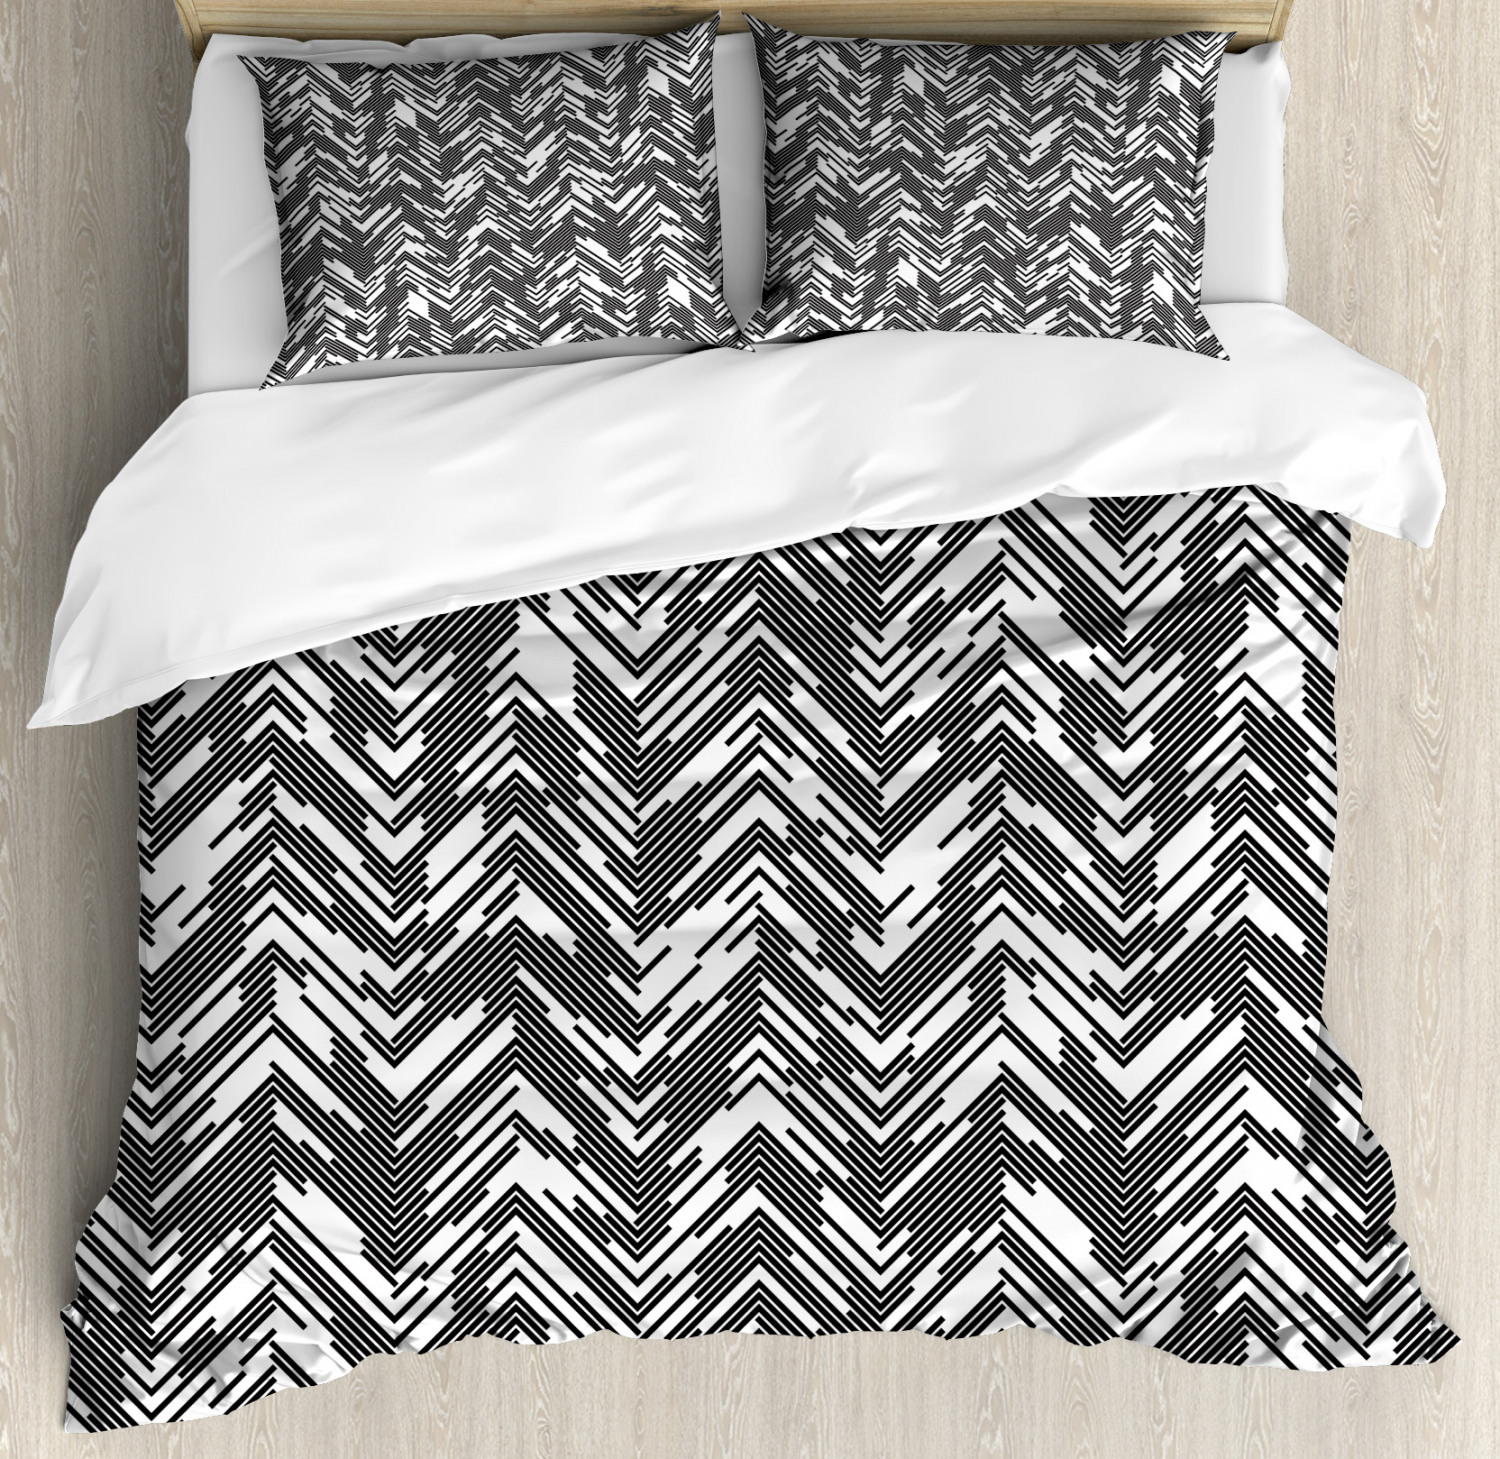 Black and White Duvet Cover Set Twin Queen King Sizes with Pillow Shams ...